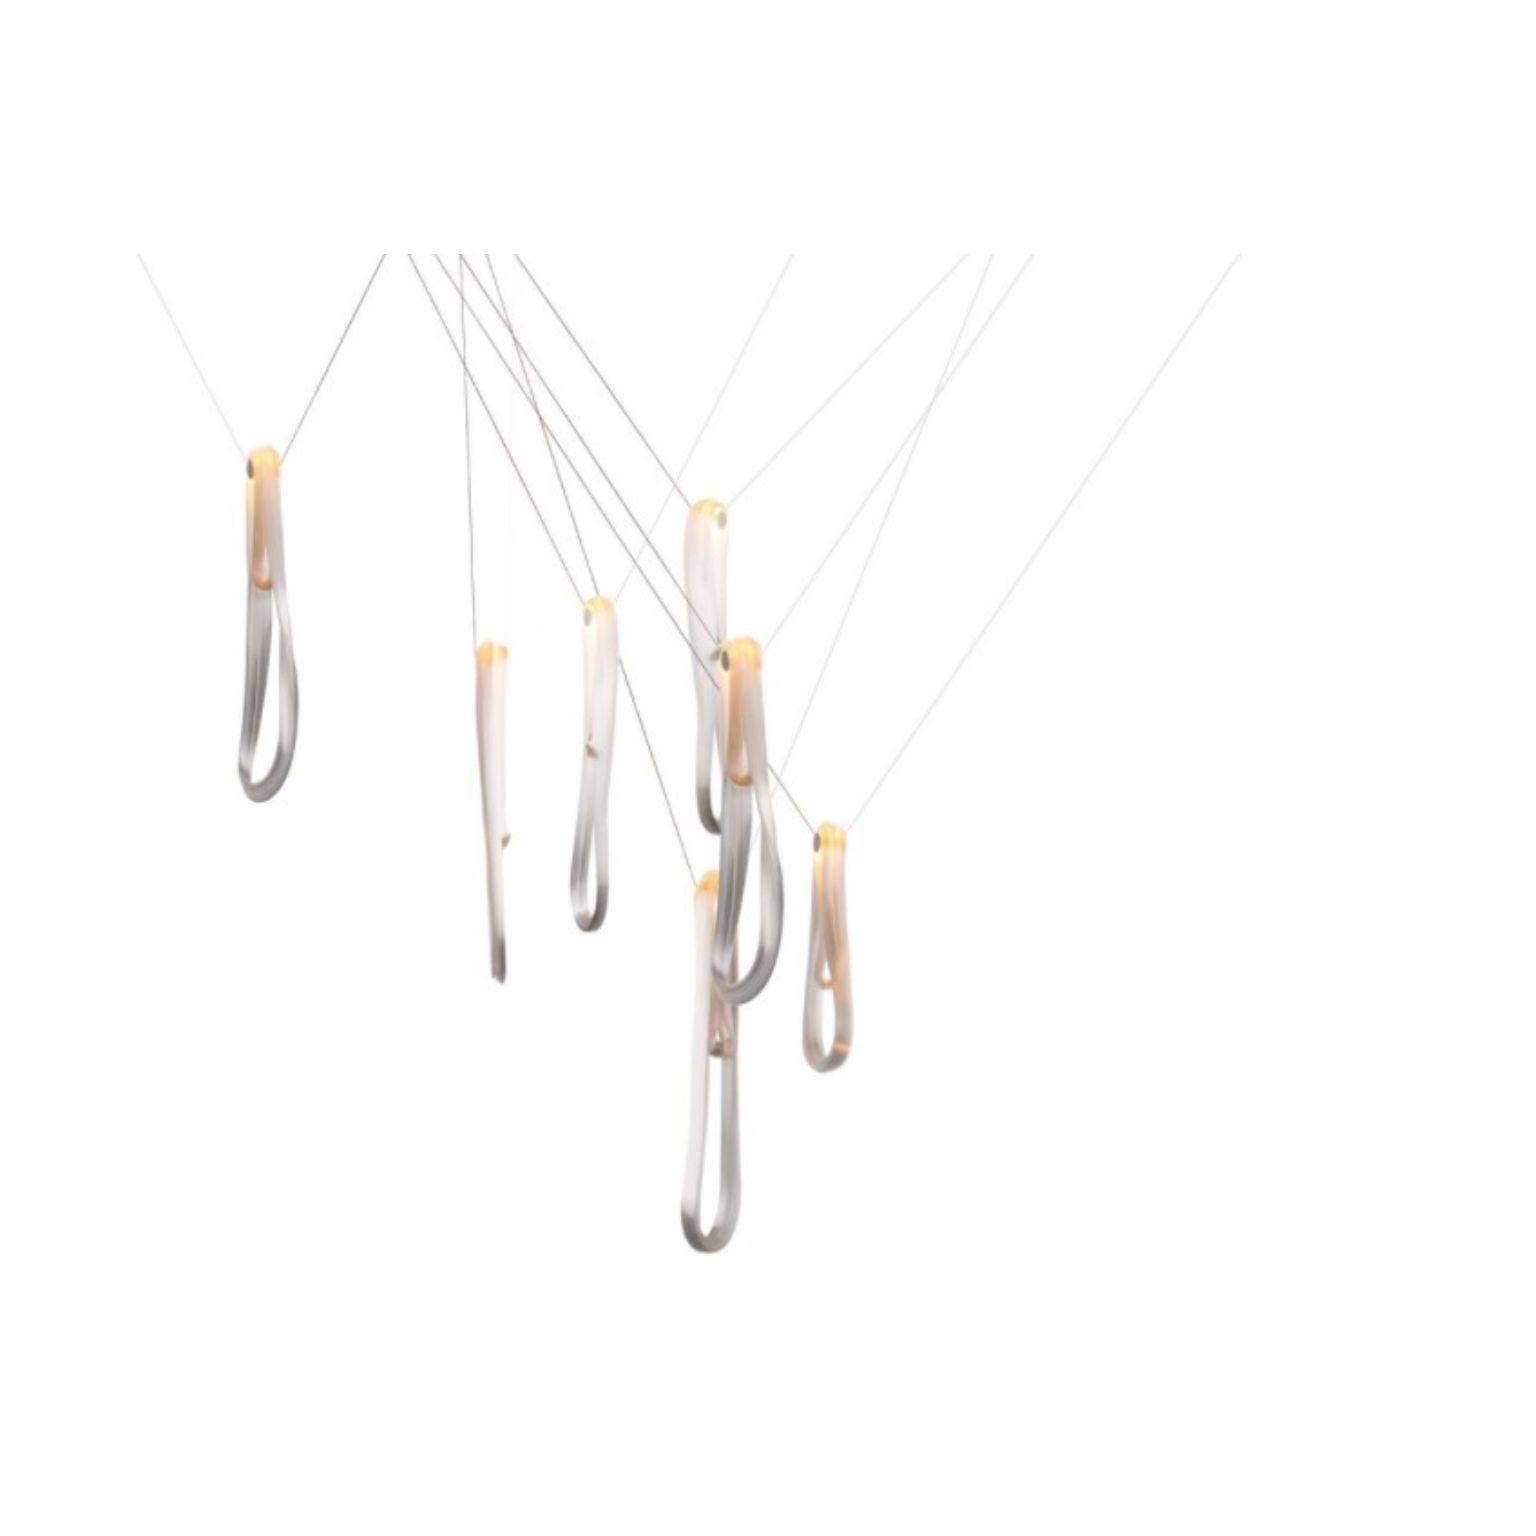 87.7 pendant by Bocci
Dimensions: D 20.3 x H 300 cm
Materials: brushed nickel round canopy
Weight: 9.5 kg
Also available in different dimensions.

All our lamps can be wired according to each country. If sold to the USA it will be wired for